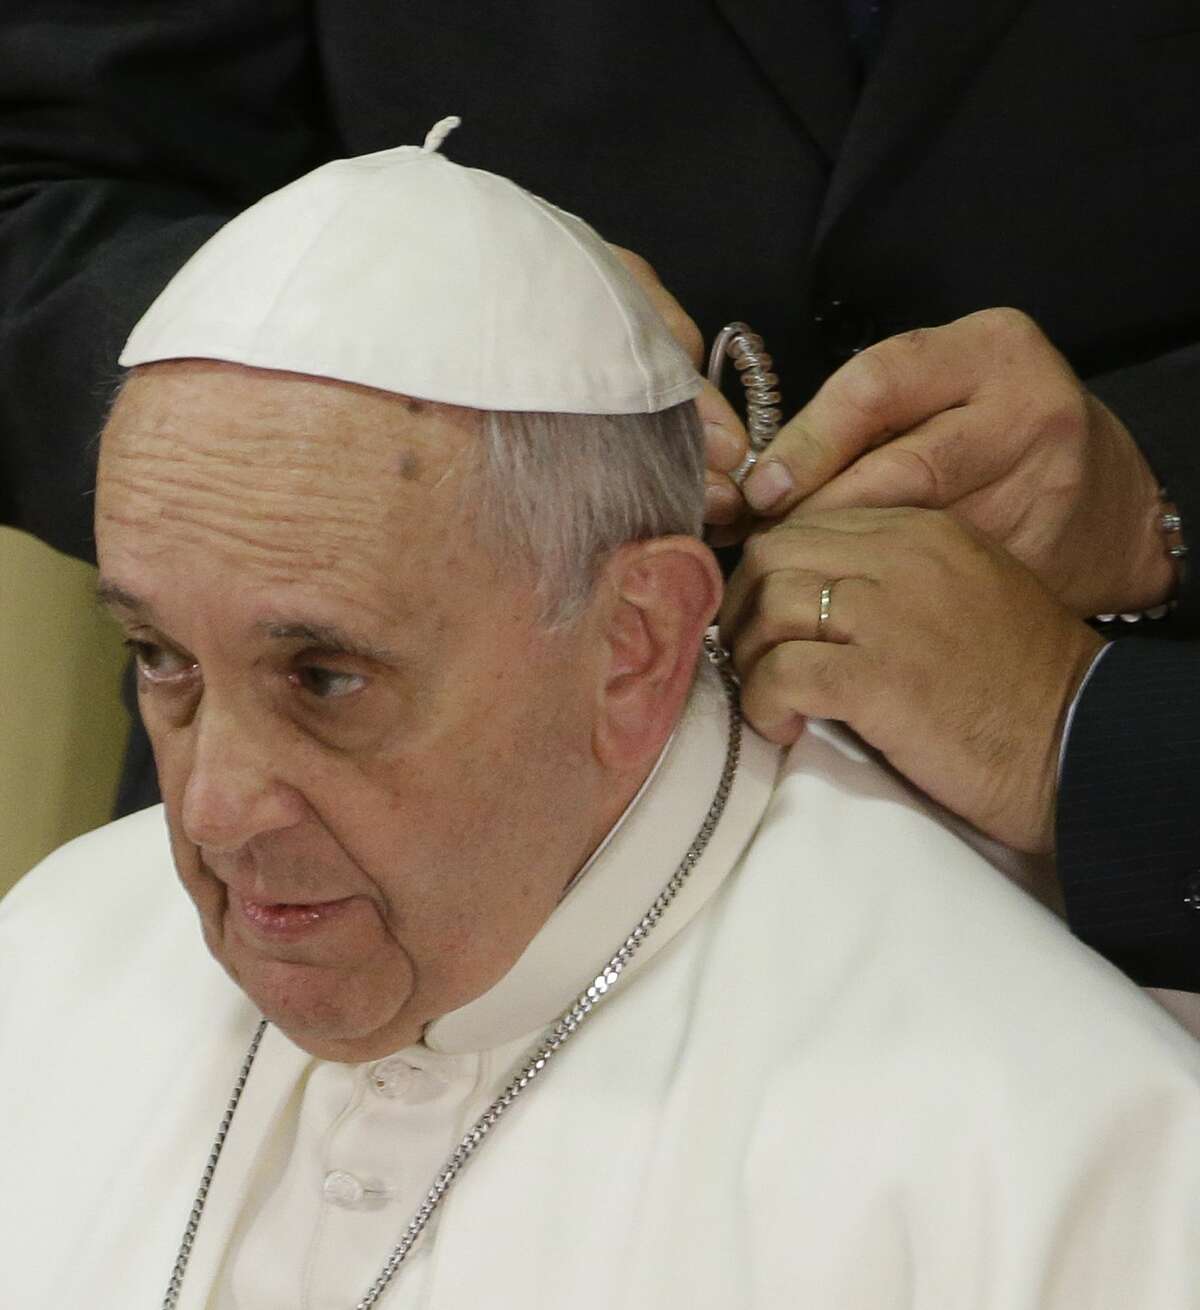 Pope Francis has an headset applied by two Vatican radio technicians prior to giving his his speech in the Synod hall on the occasion of the closing ceremony of the IV Scholas Occurrentes World Educational Congress, at the Vatican, Thursday, Feb. 5, 2015. (AP Photo/Gregorio Borgia)